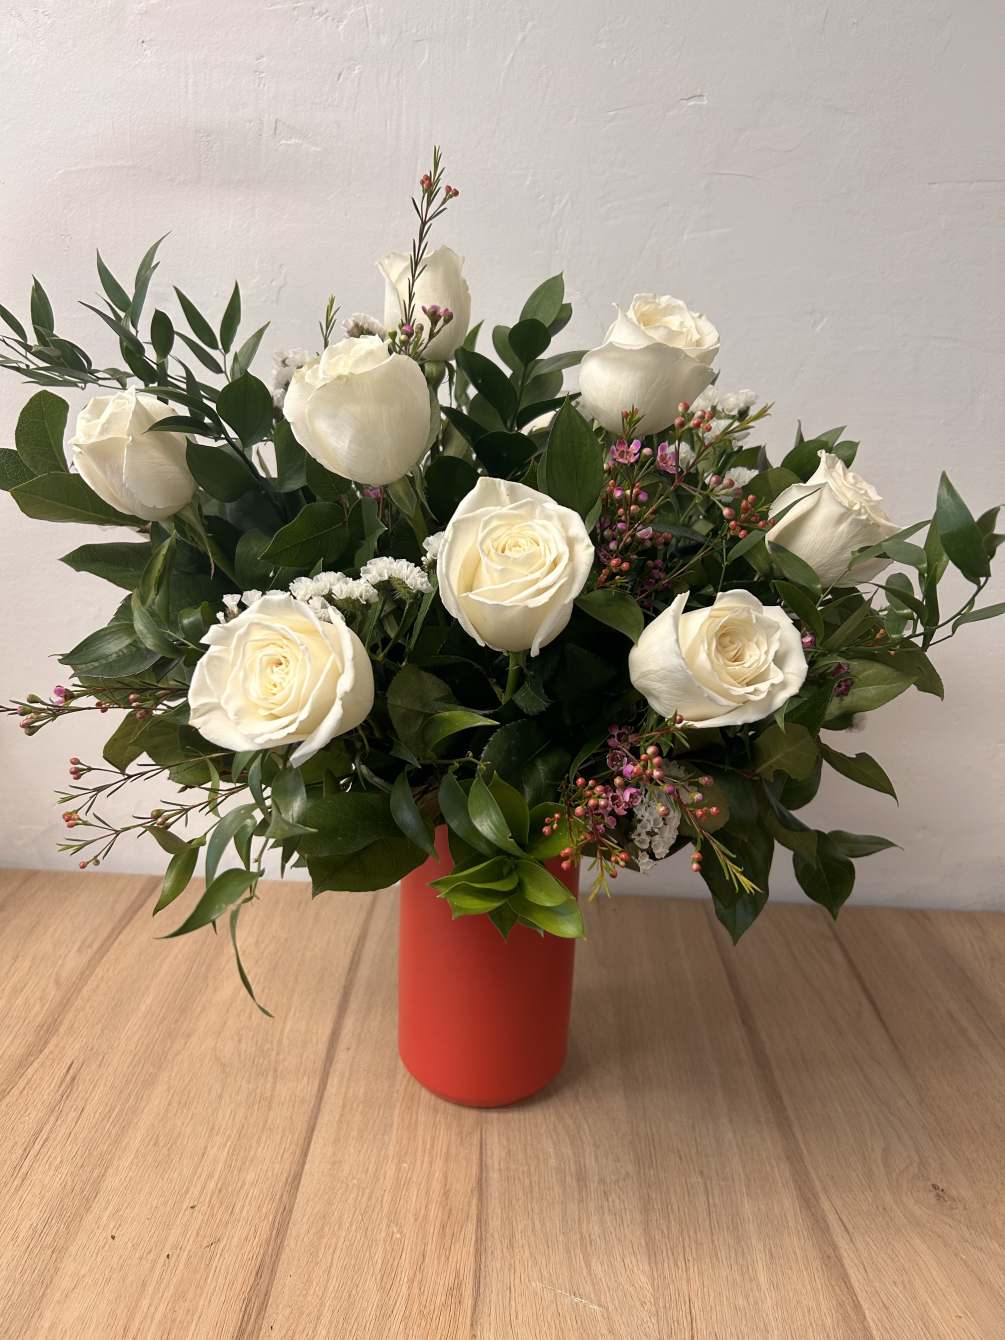 A classic rose arrangement with modern styled greens.
Pictures is standard size 1